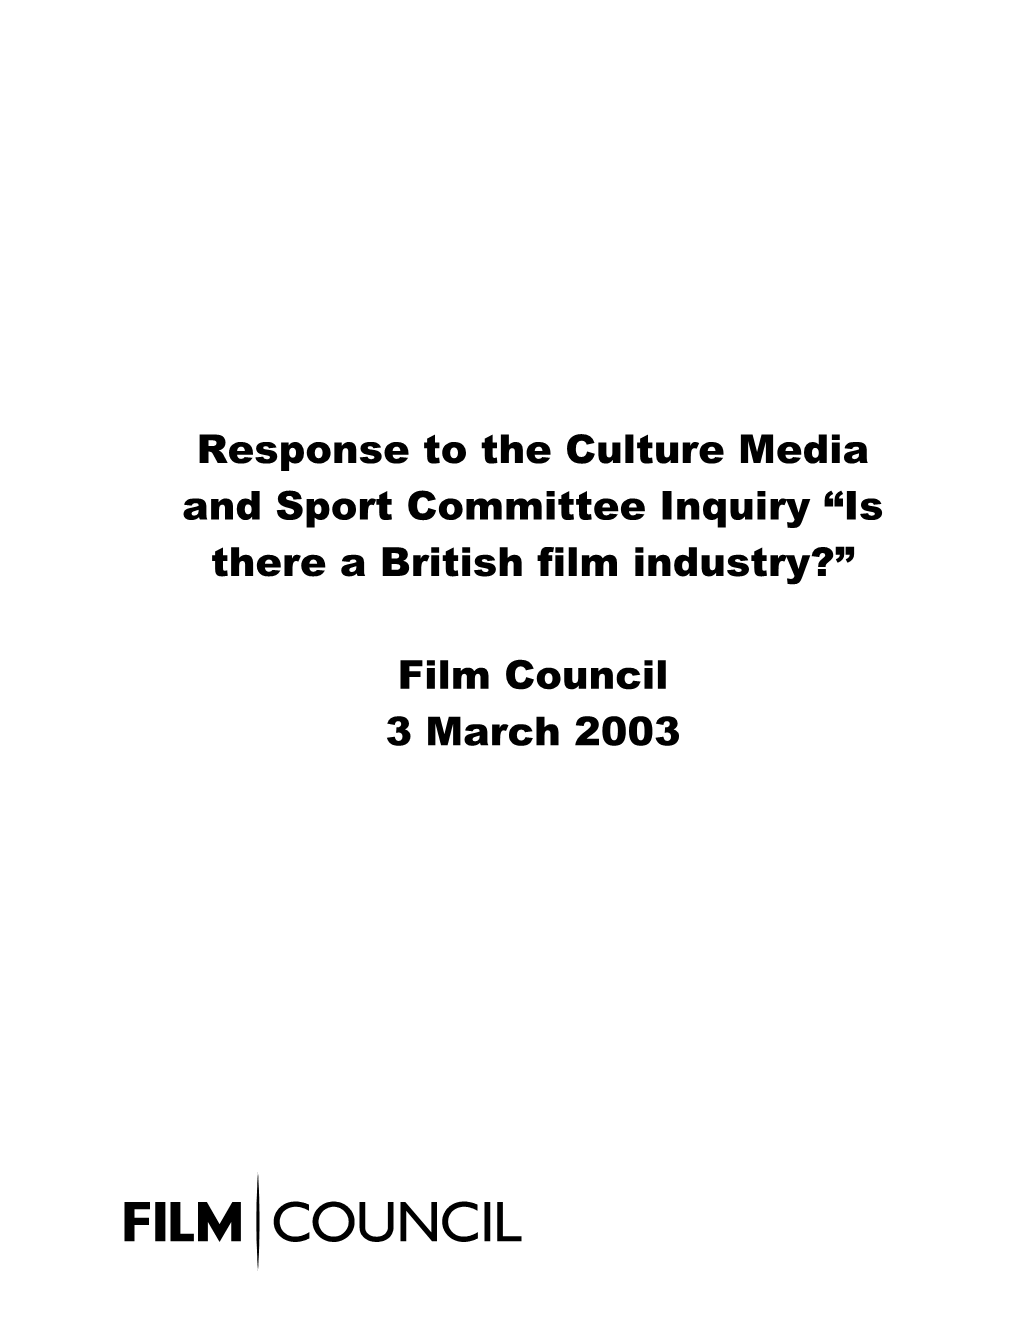 Response to the Culture Media and Sport Committee Inquiry Is There a British Film Industry?